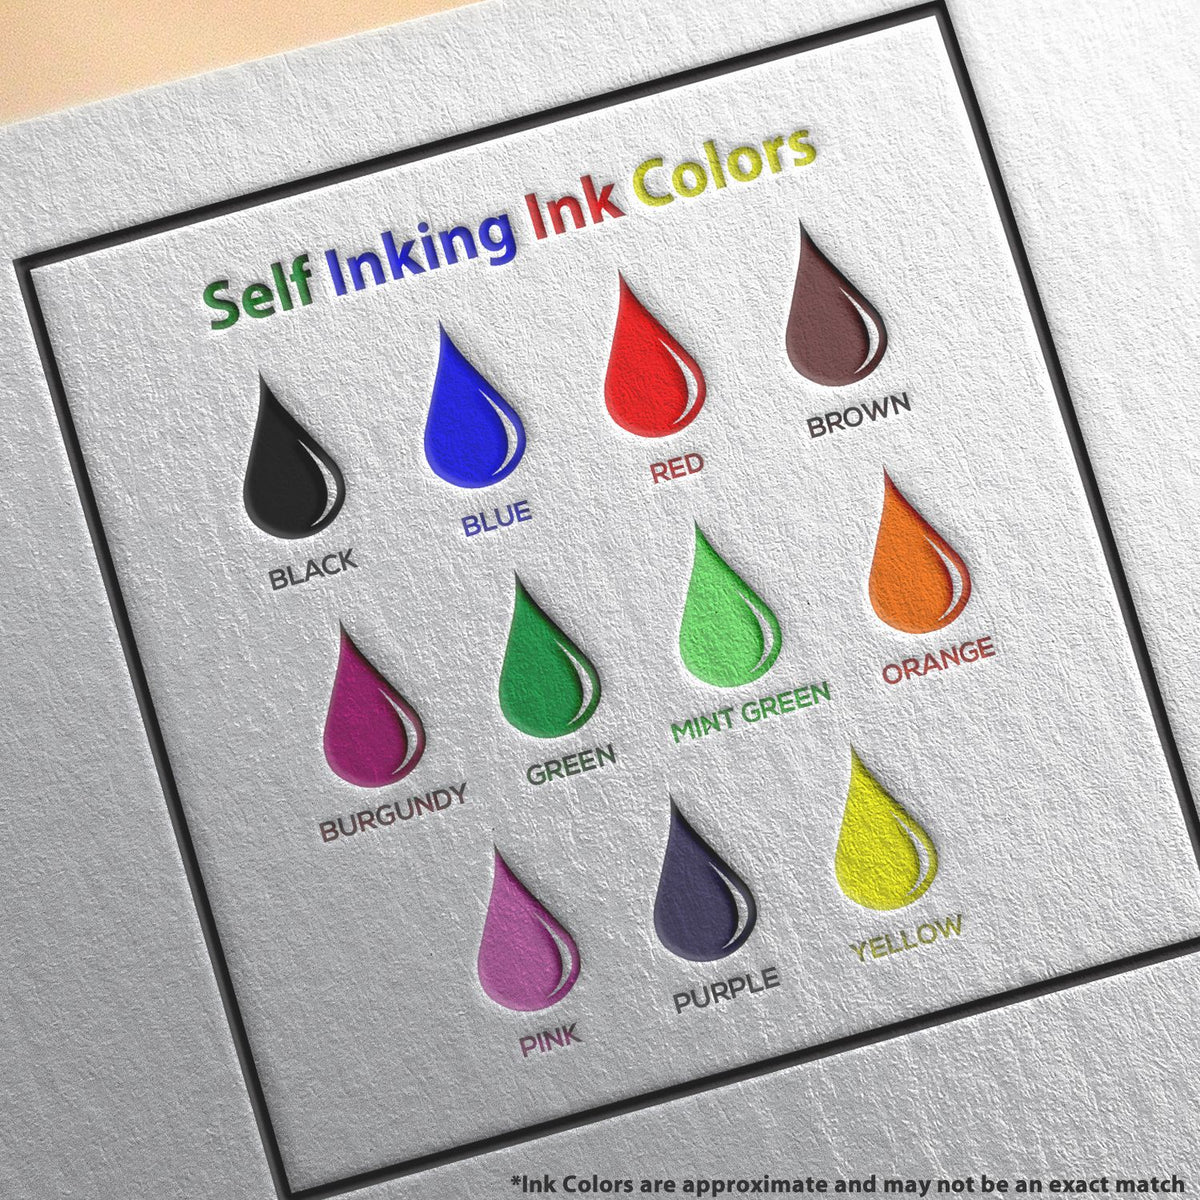 A picture showing the different ink colors or hues available for the Self-Inking Illinois Landscape Architect Stamp product.